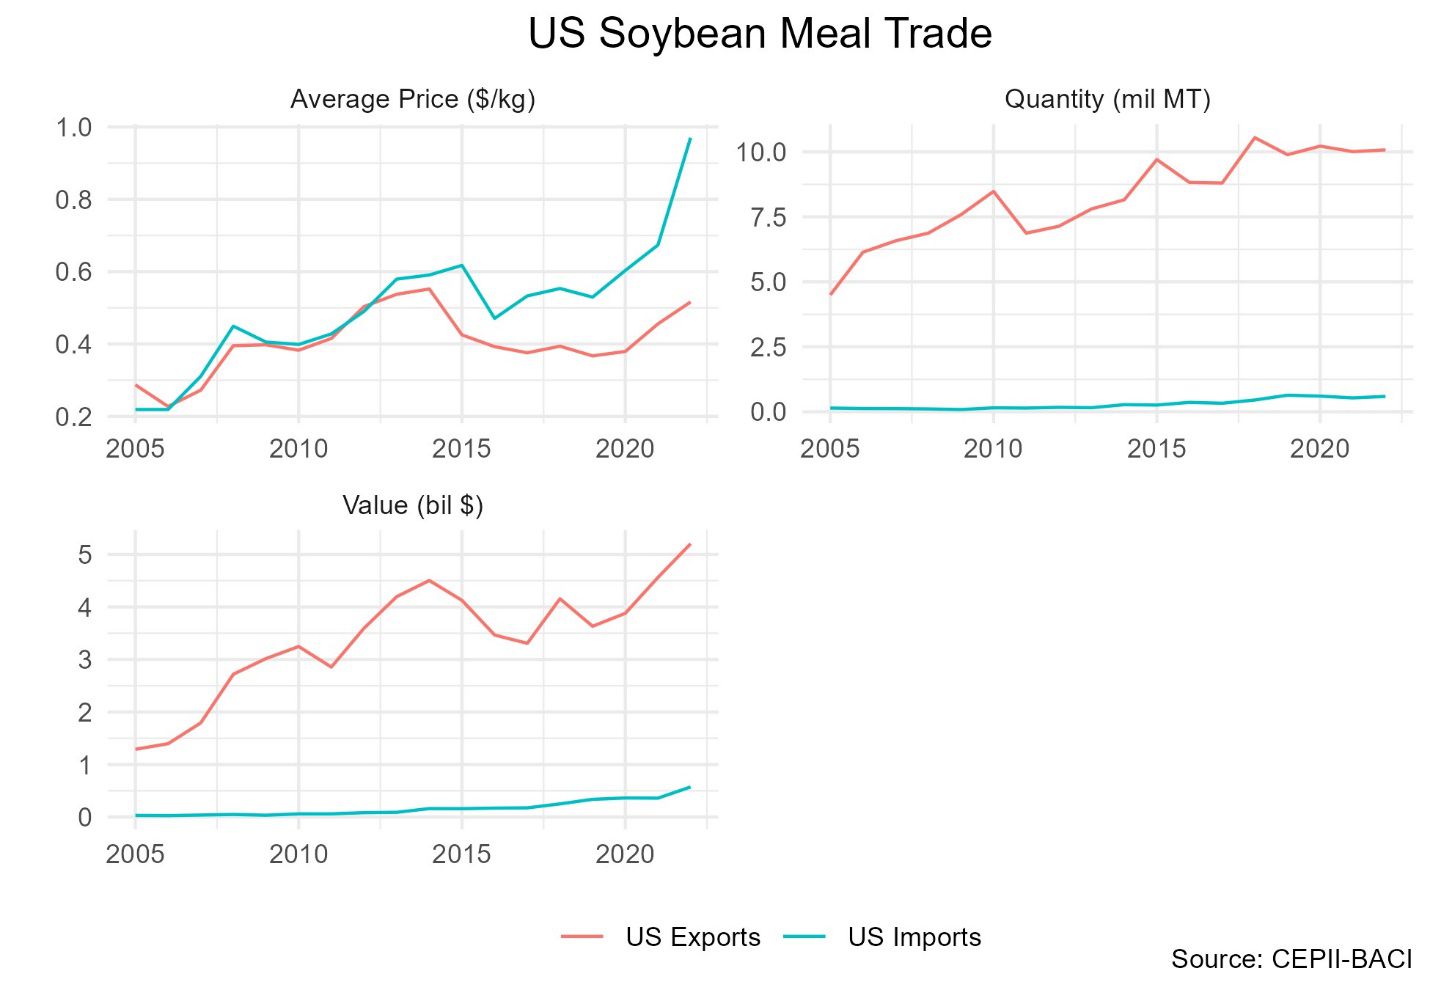 3 graphs of world soybean meal average price, quantity, and value